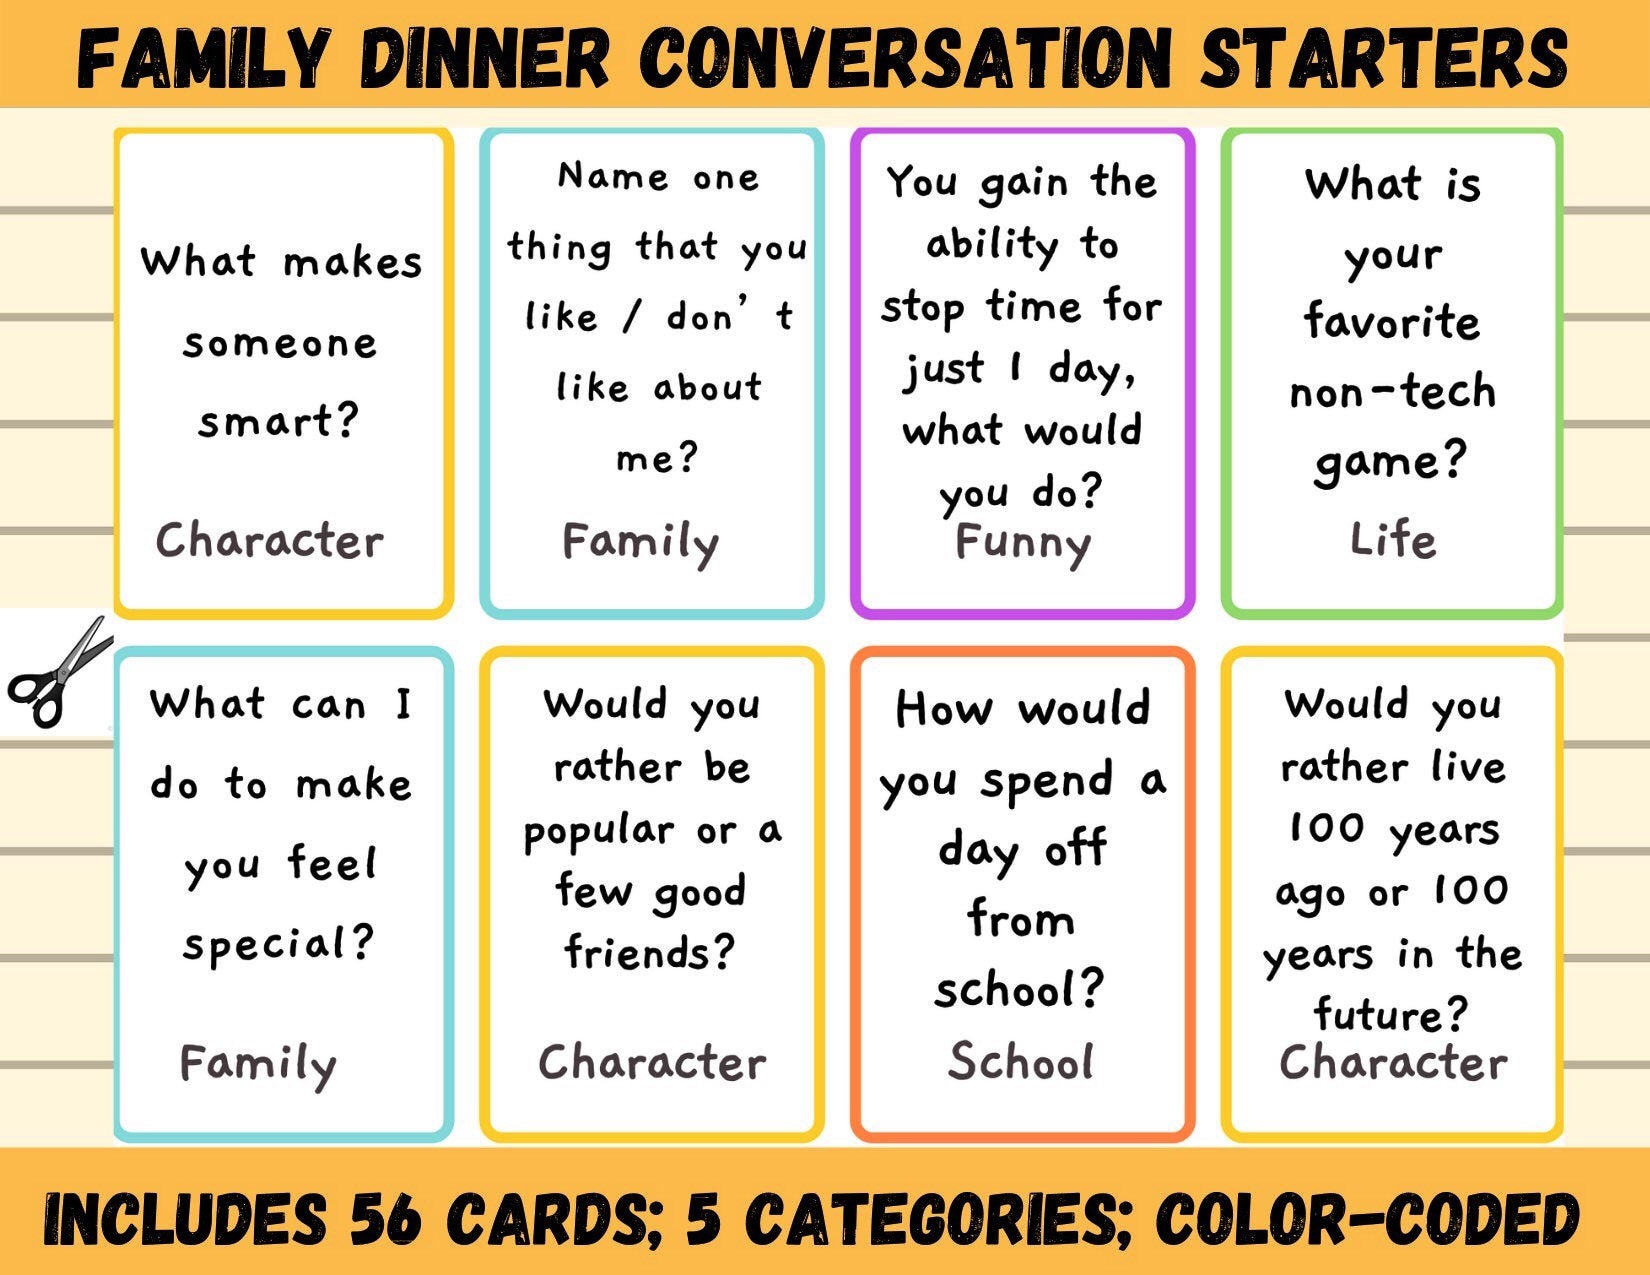 Would You Rather? - The Family Dinner Project - The Family